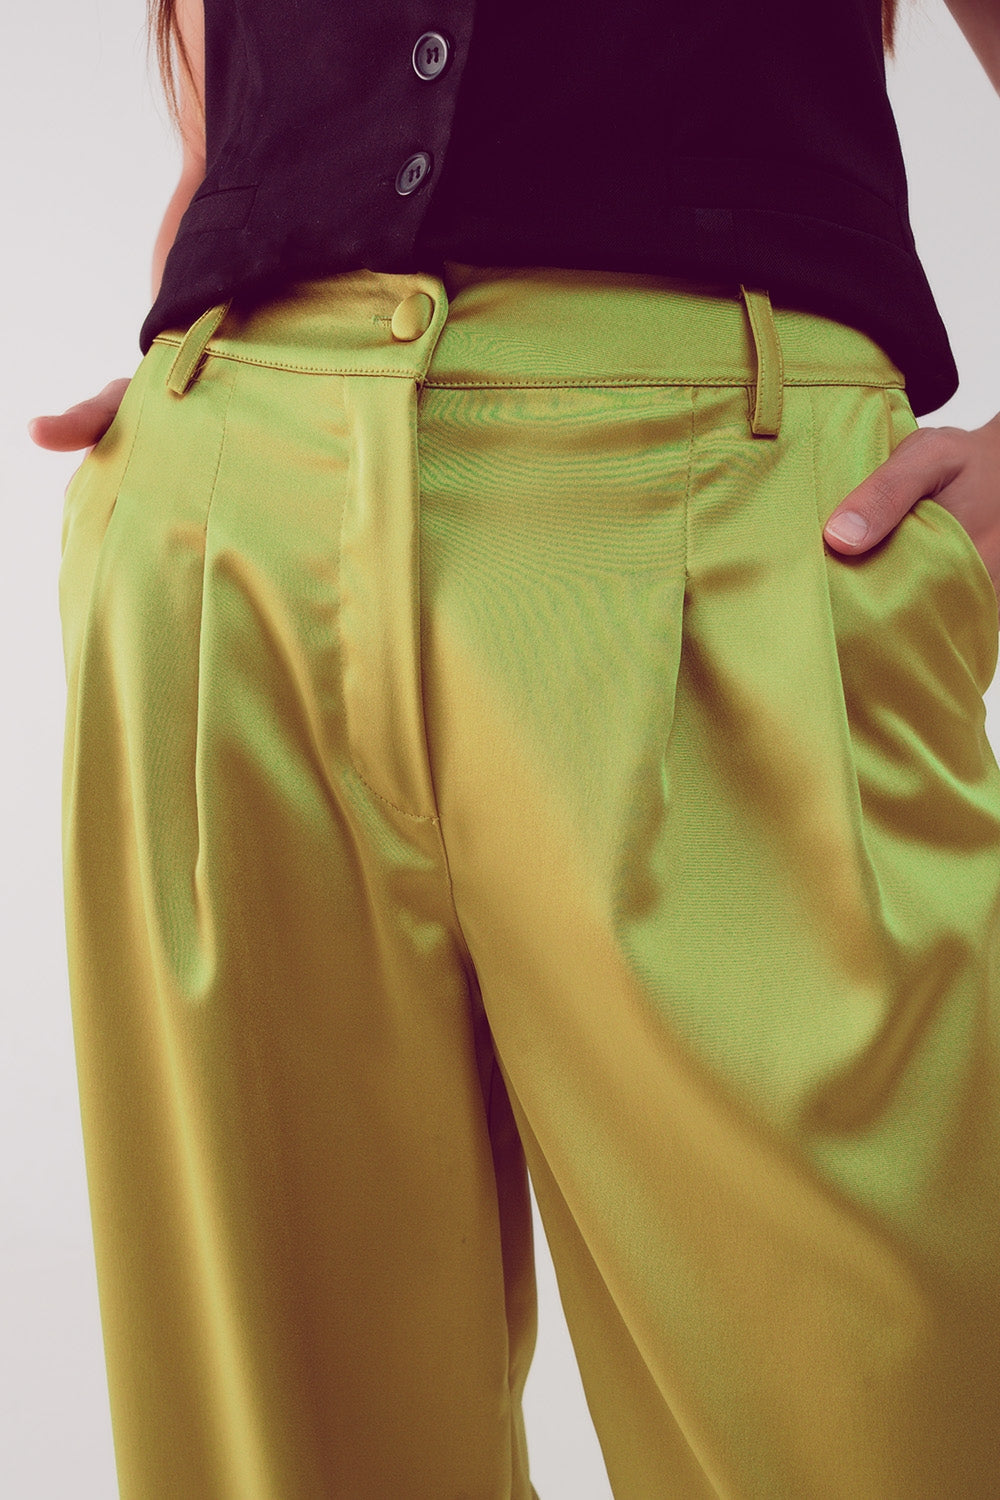 RM - Palazzo Pleated Pants in Acid Lime